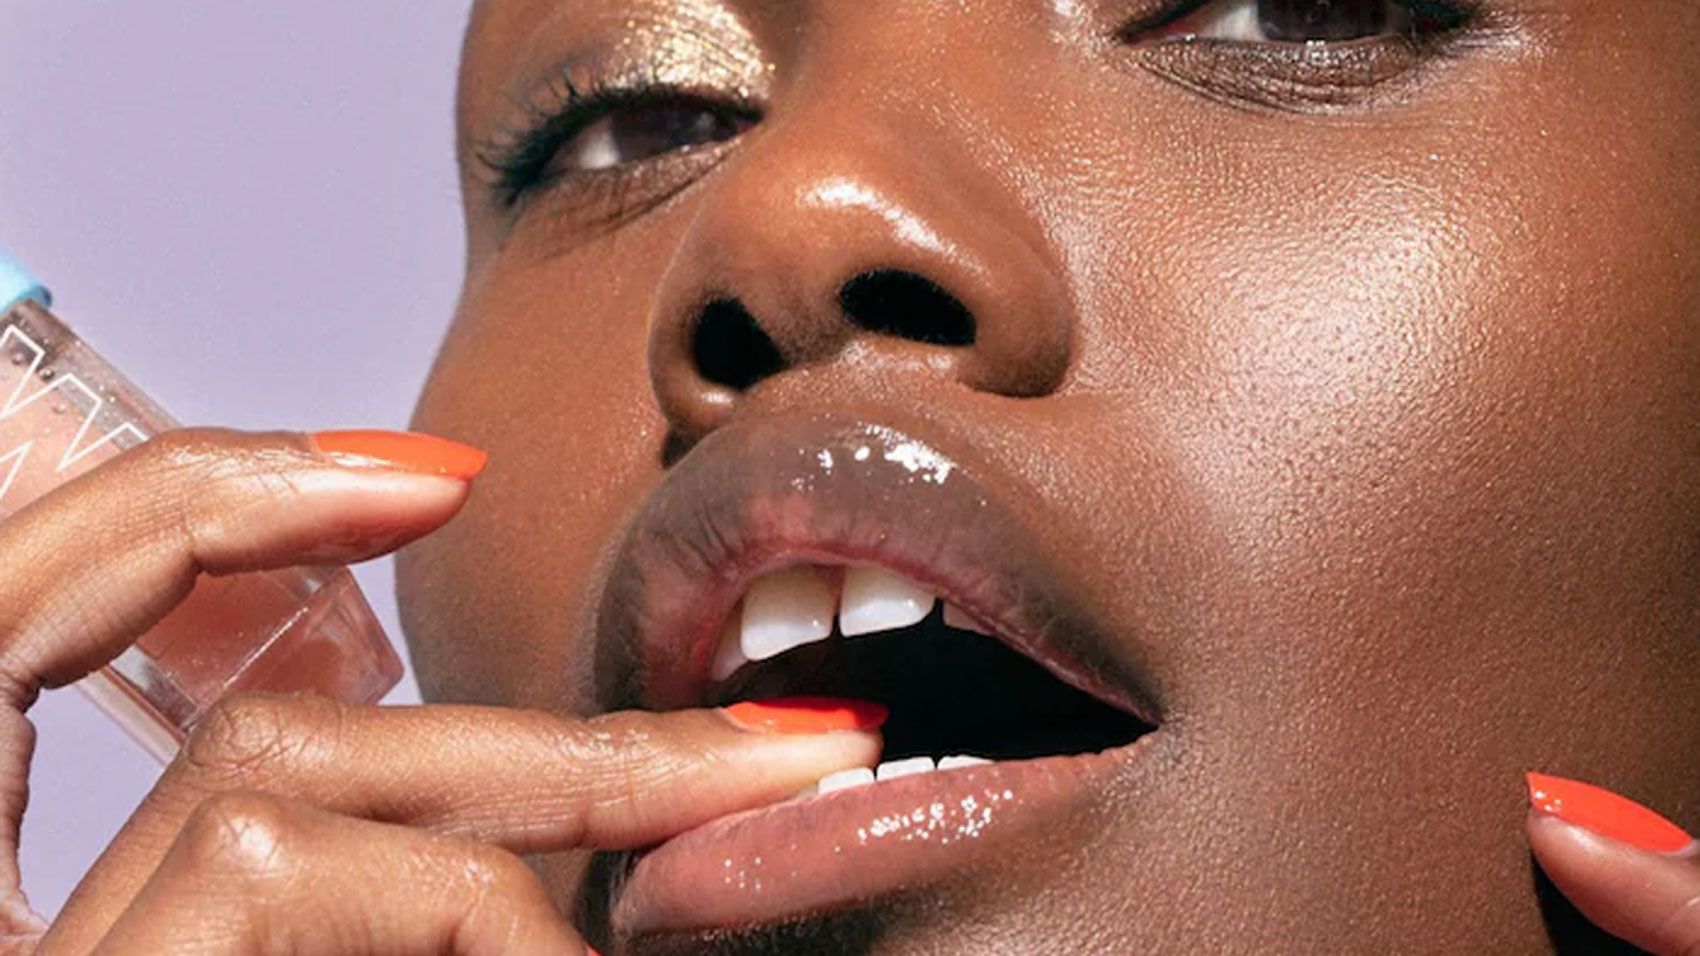 The 16 best non-sticky lip glosses that last all day